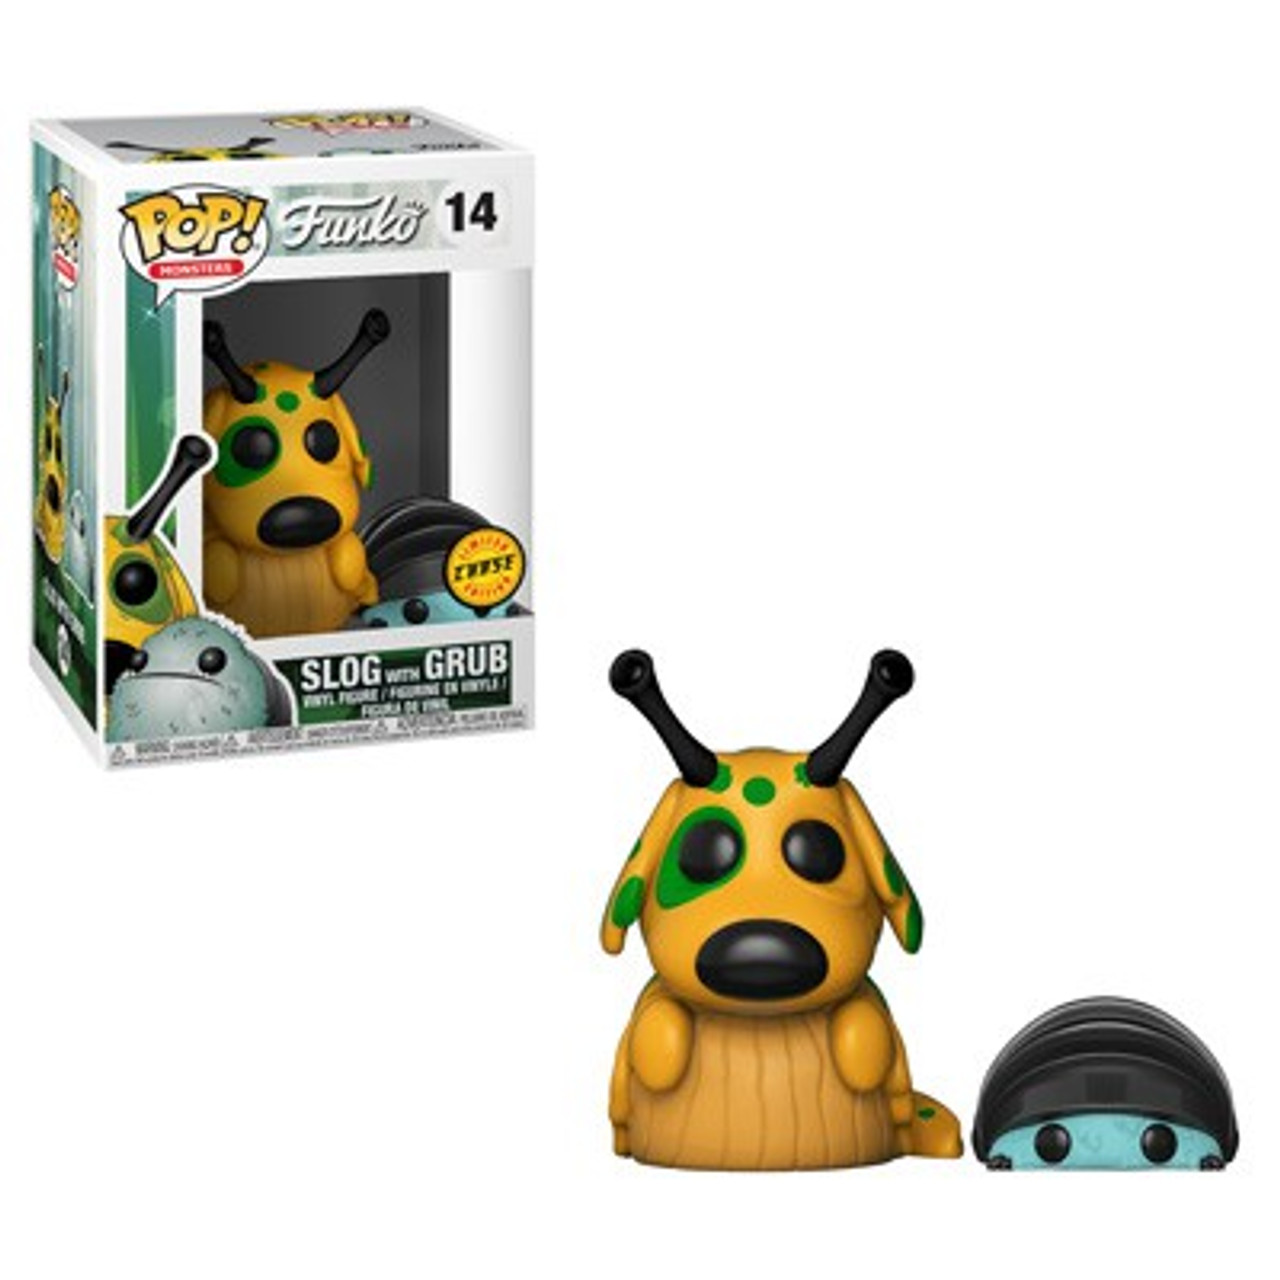 Funko Wetmore Forest Pop Monsters Slog With Grub Vinyl Figure 14 Chase Version Toywiz - when a sloth chases you roblox